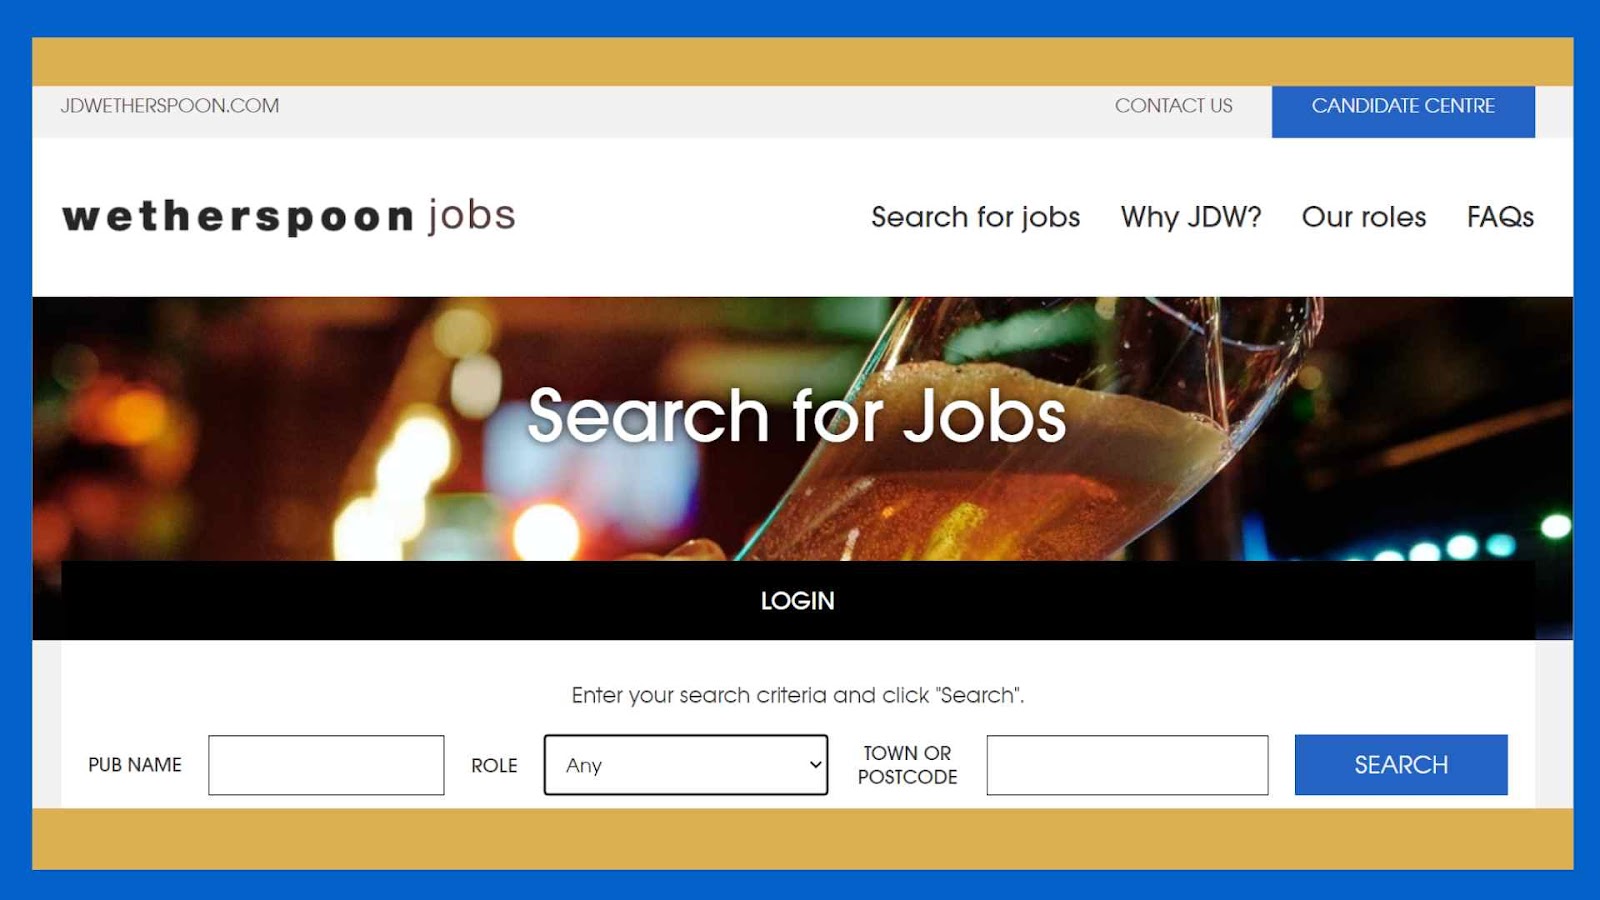 How to find the latest Wetherspoon jobs?